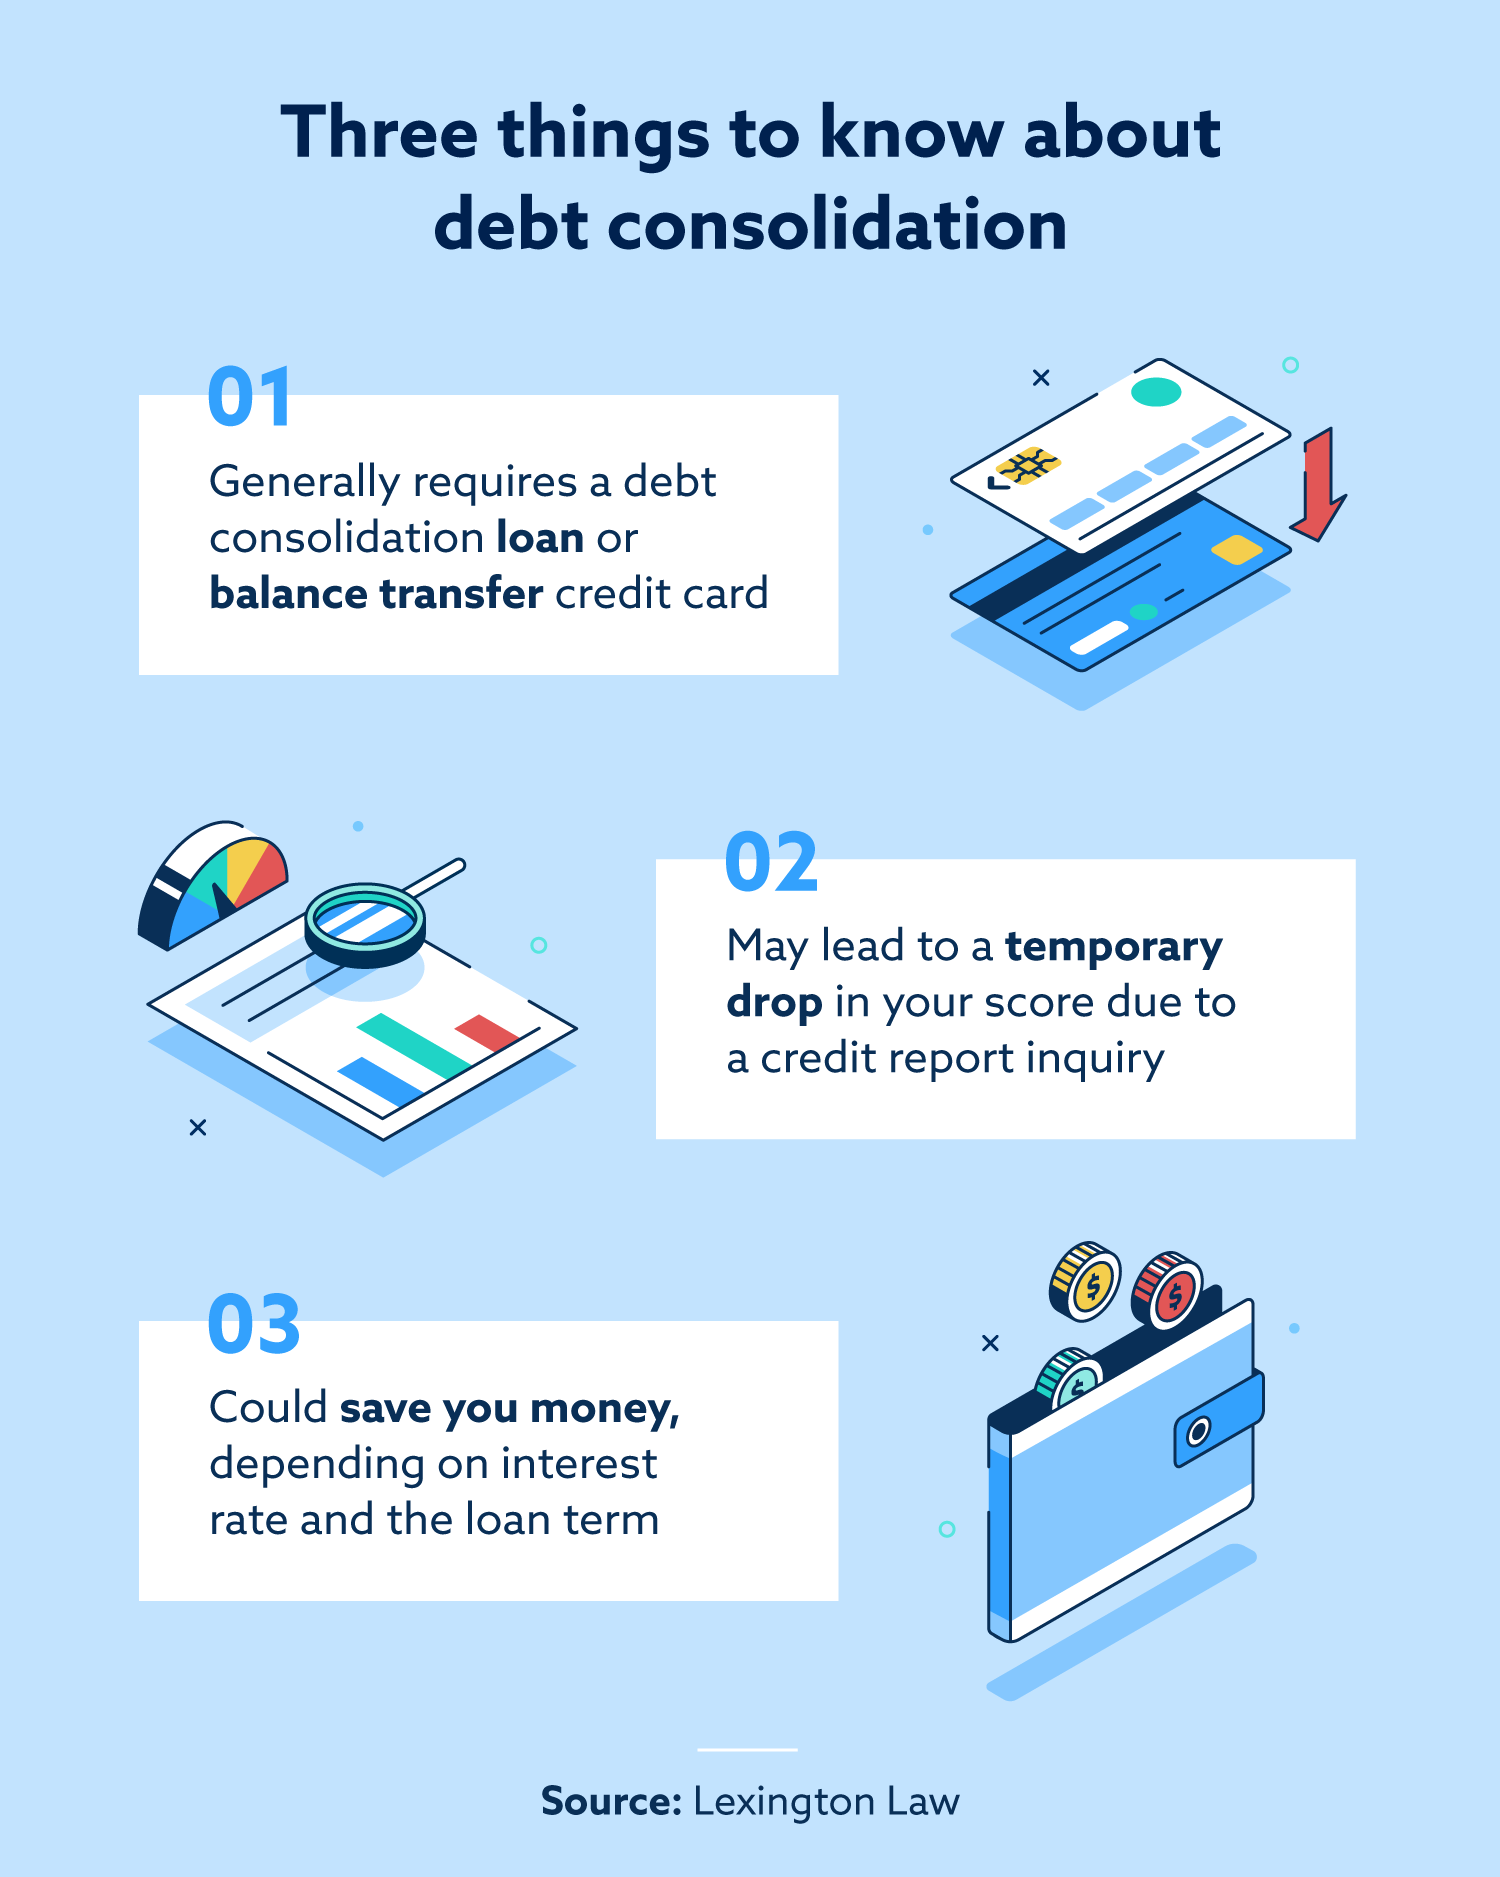 Three things to know about debt consolidation